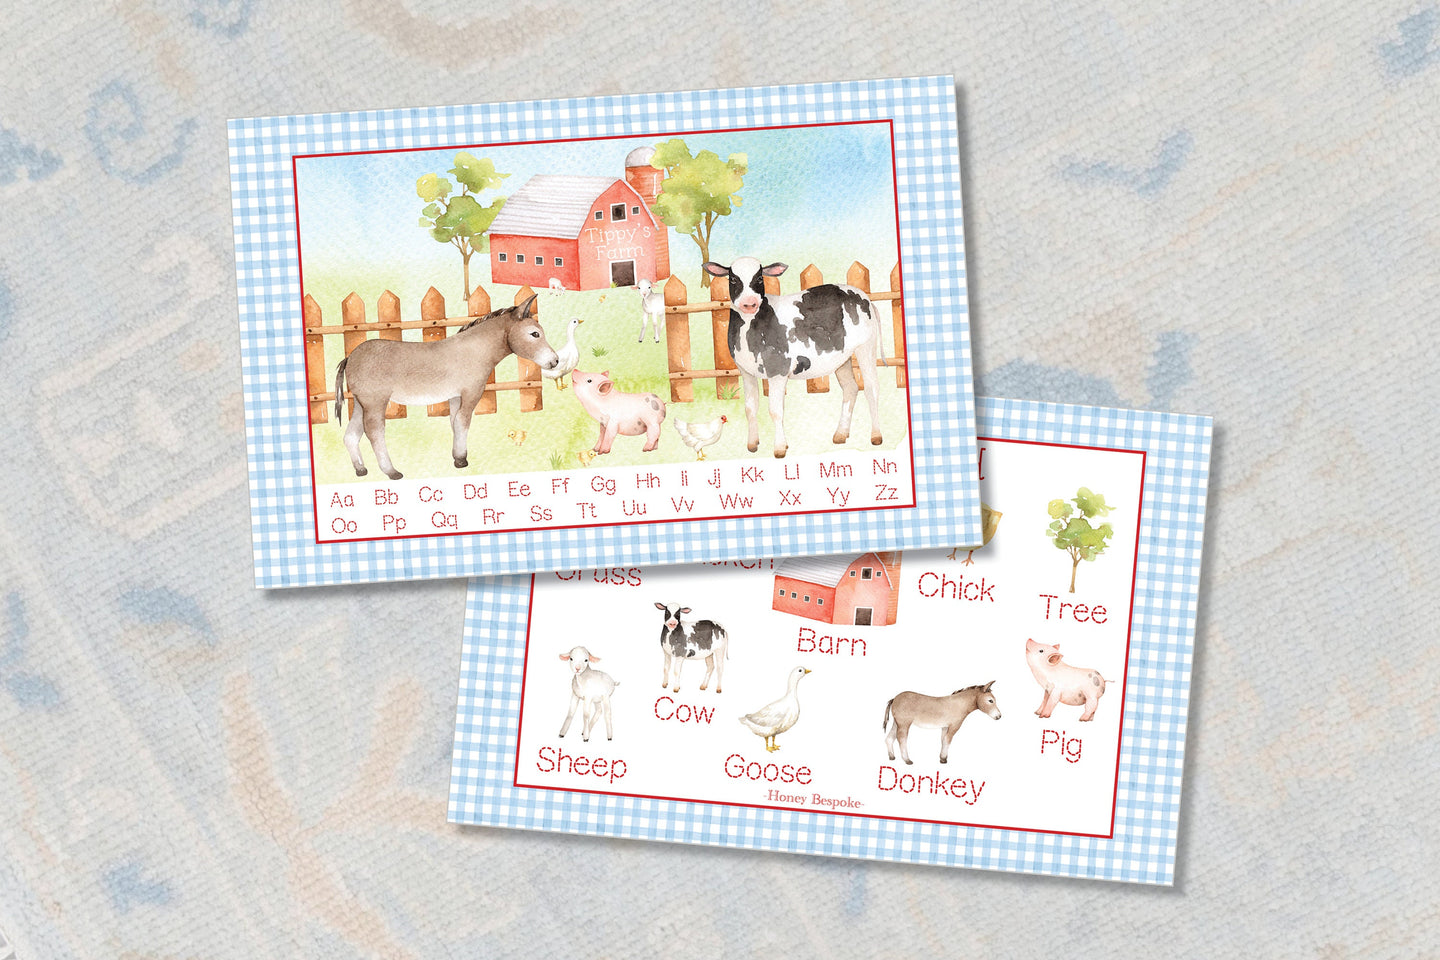 Laminated Personalized Farm Placemat / Watercolor Farm Animals Placemat / Educational Placemat / Laminated Placemat / Boys Placemat